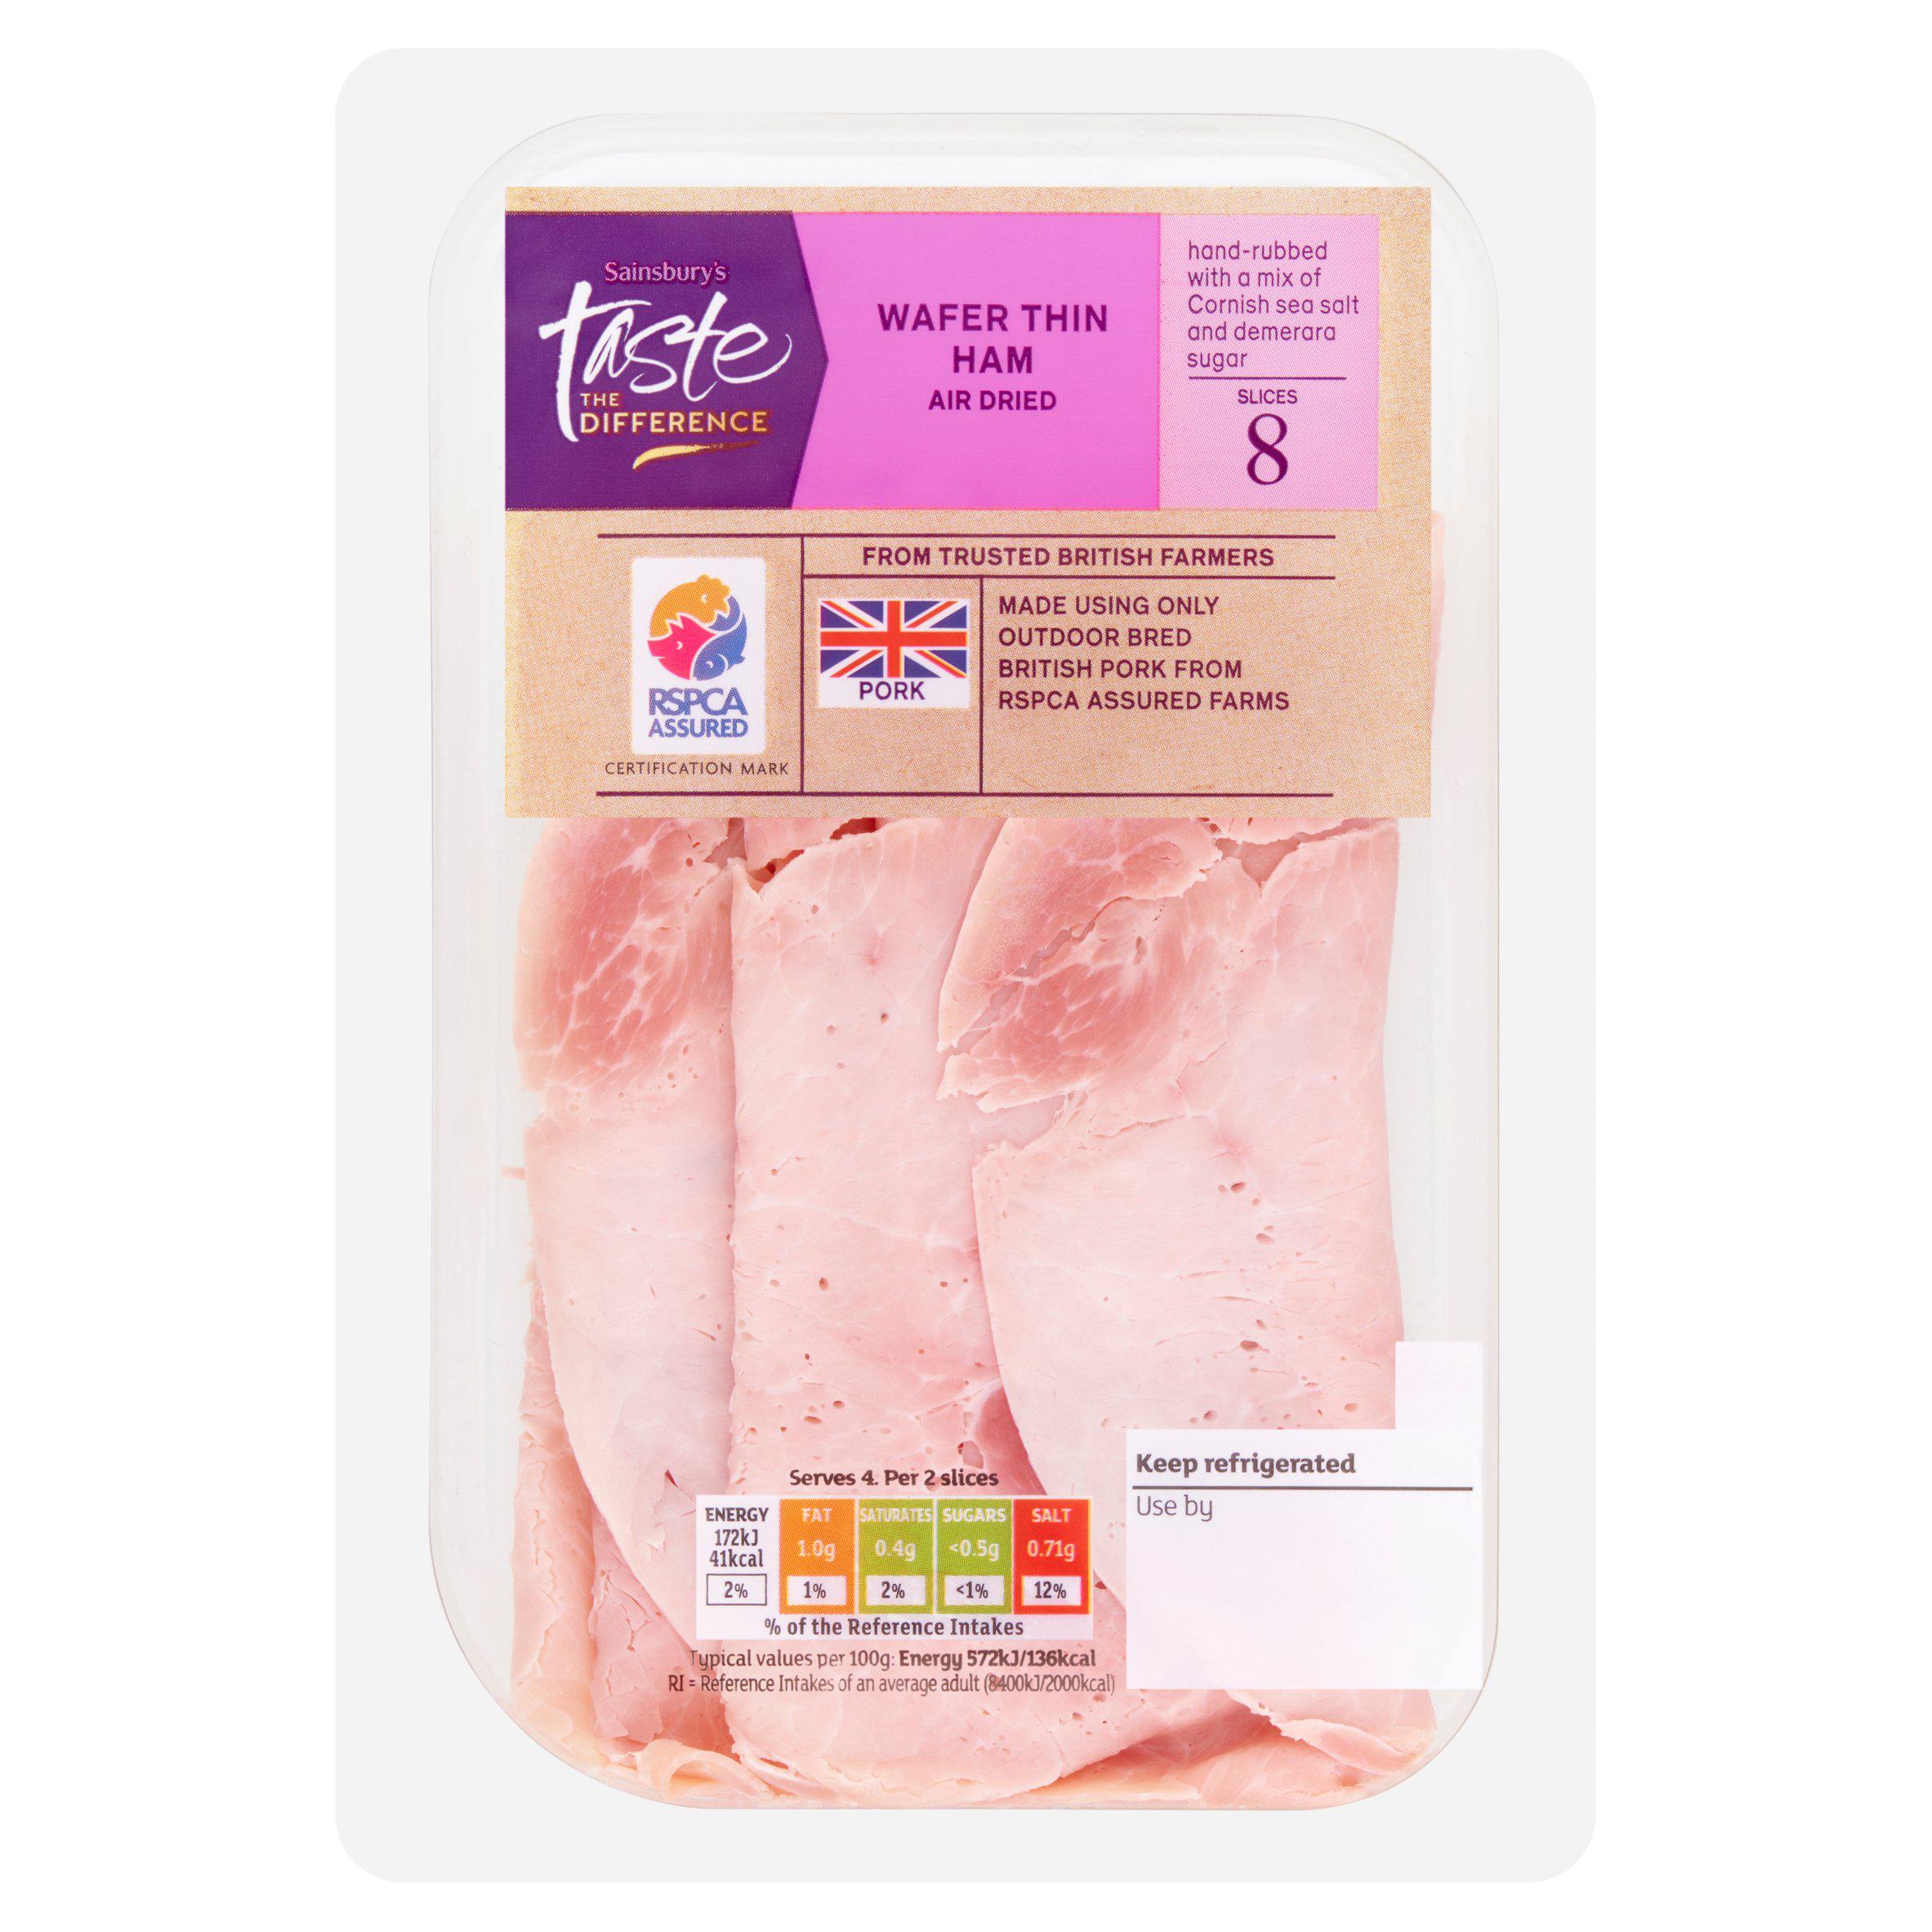 Sainsbury's Wafer Thin Air Dried British Ham Slices, Taste the Difference 120g